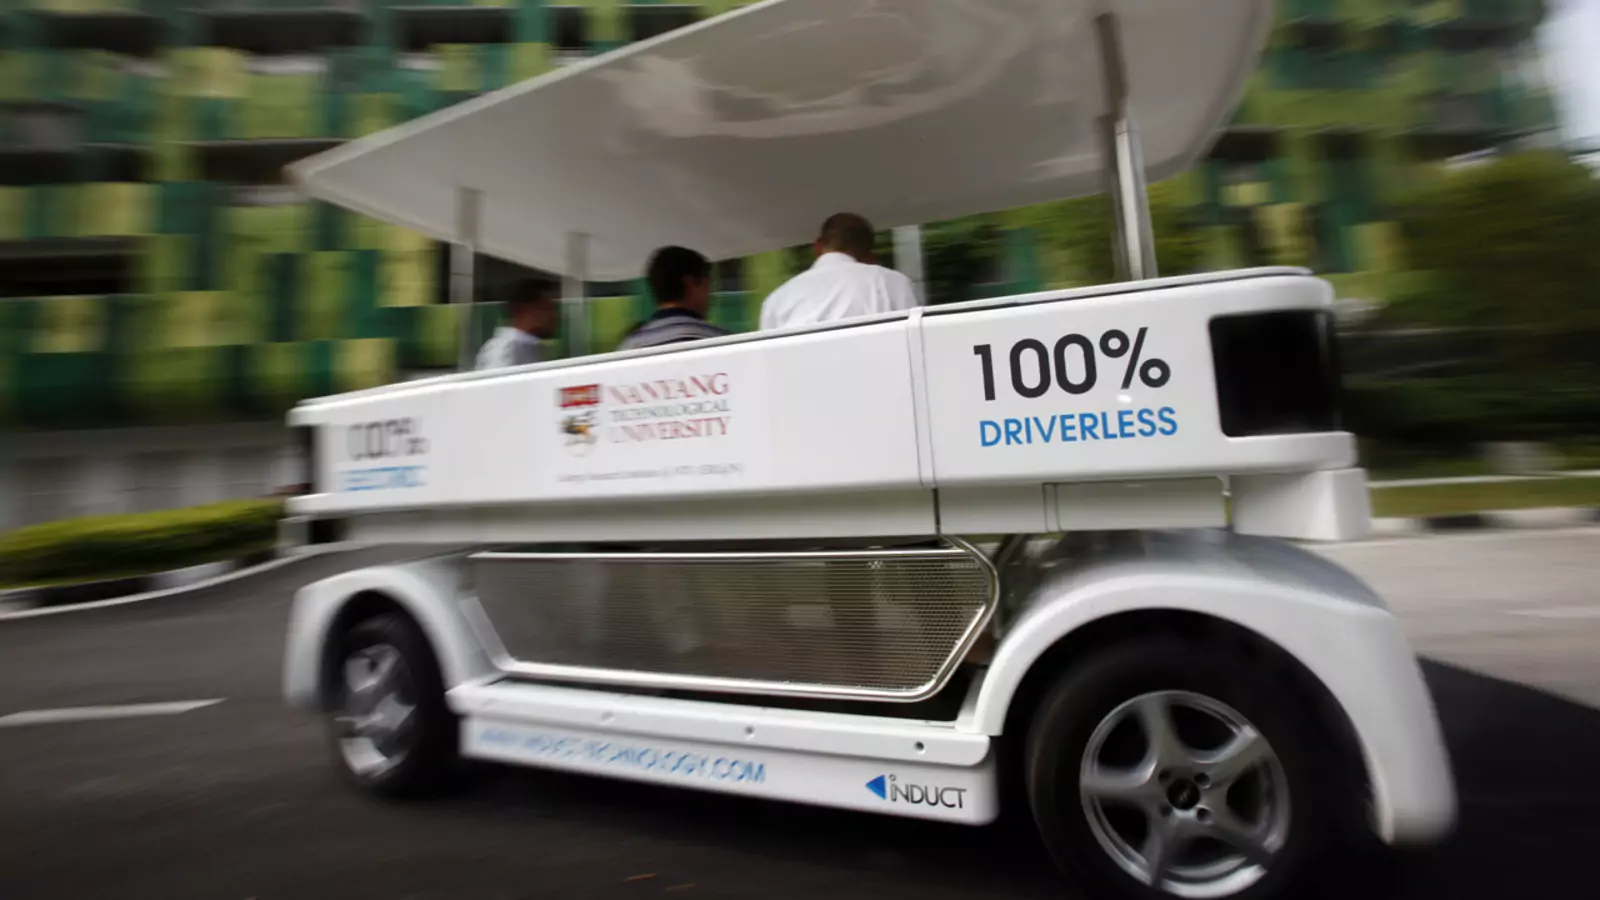 People ride on a driverless electric vehicle at the Nanyang Technological University (NTU) in Singapore.